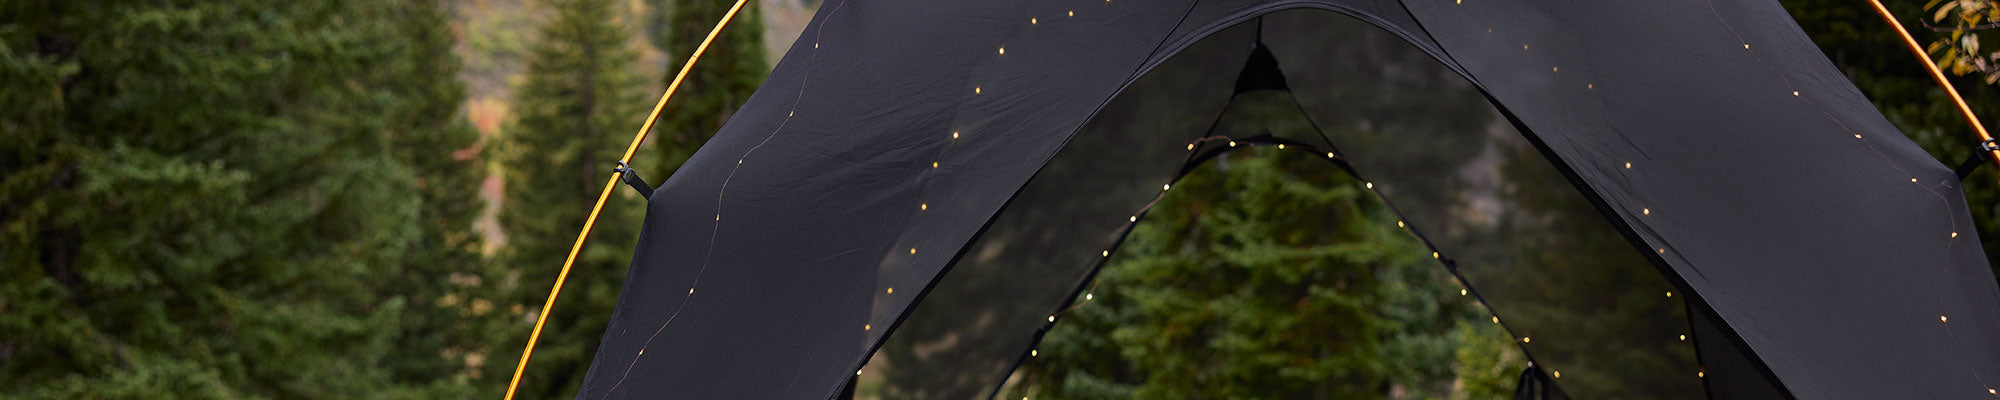 A TETON Sports Mountain Ultra tent decorated with holiday lights